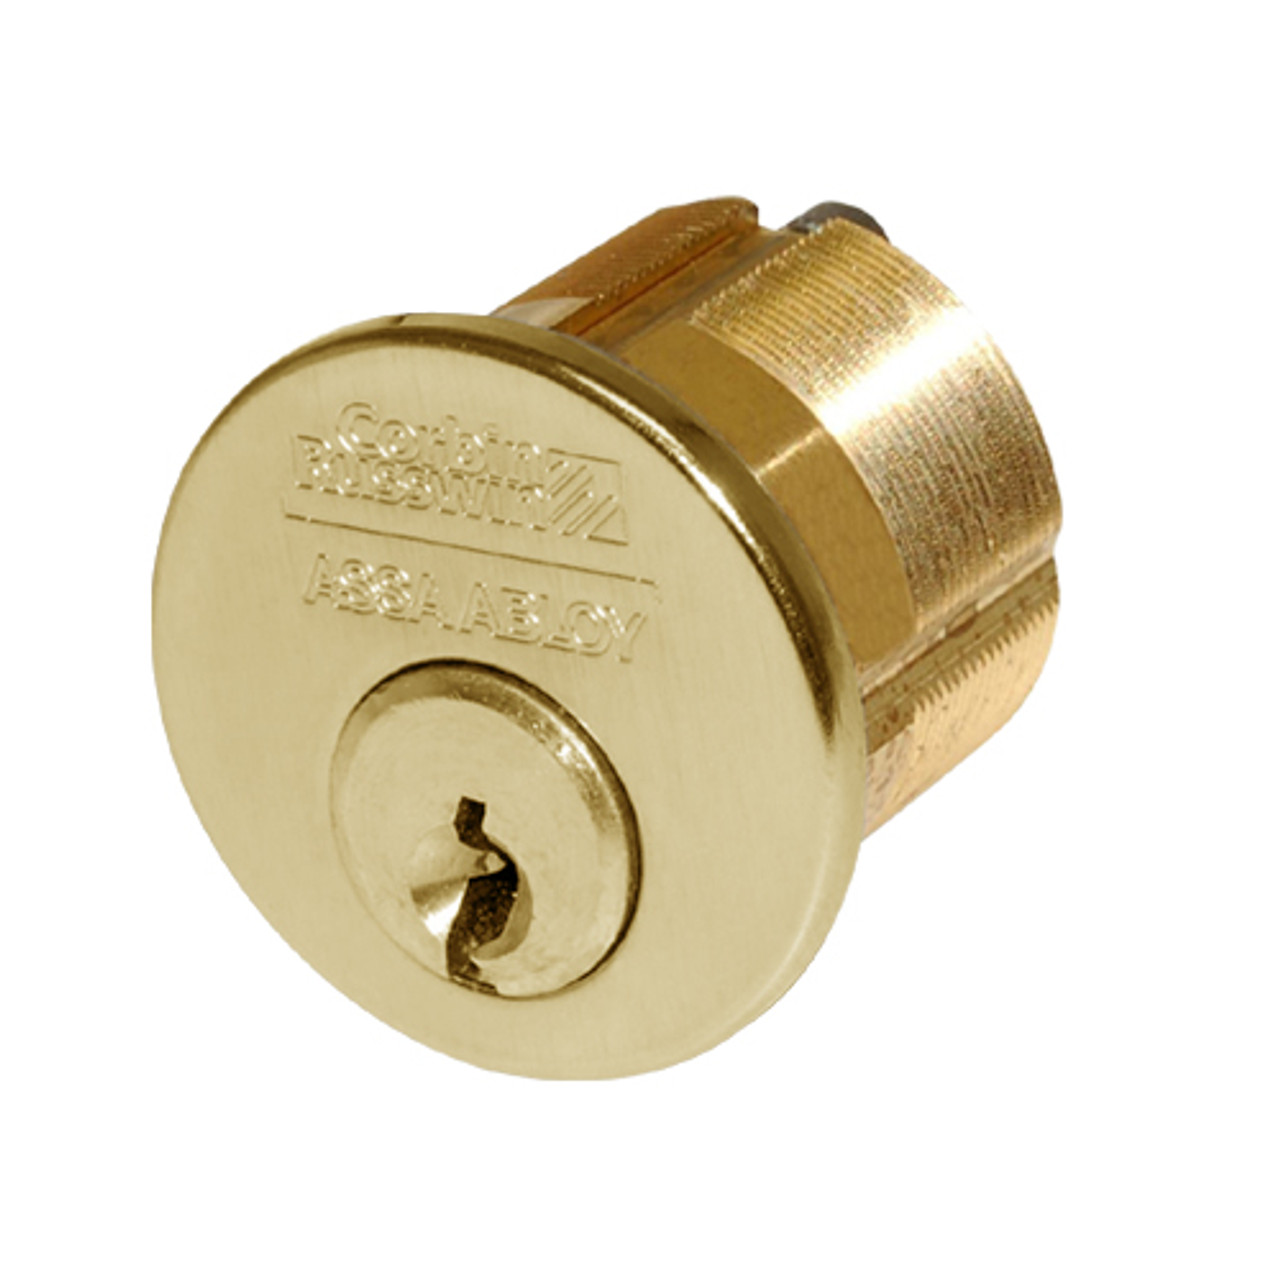 CR1000-200-A06-6-59A1-605 Corbin Conventional Mortise Cylinder for Mortise Lock and DL3000 Deadlocks with Schlage L9000 Cam in Bright Brass Finish